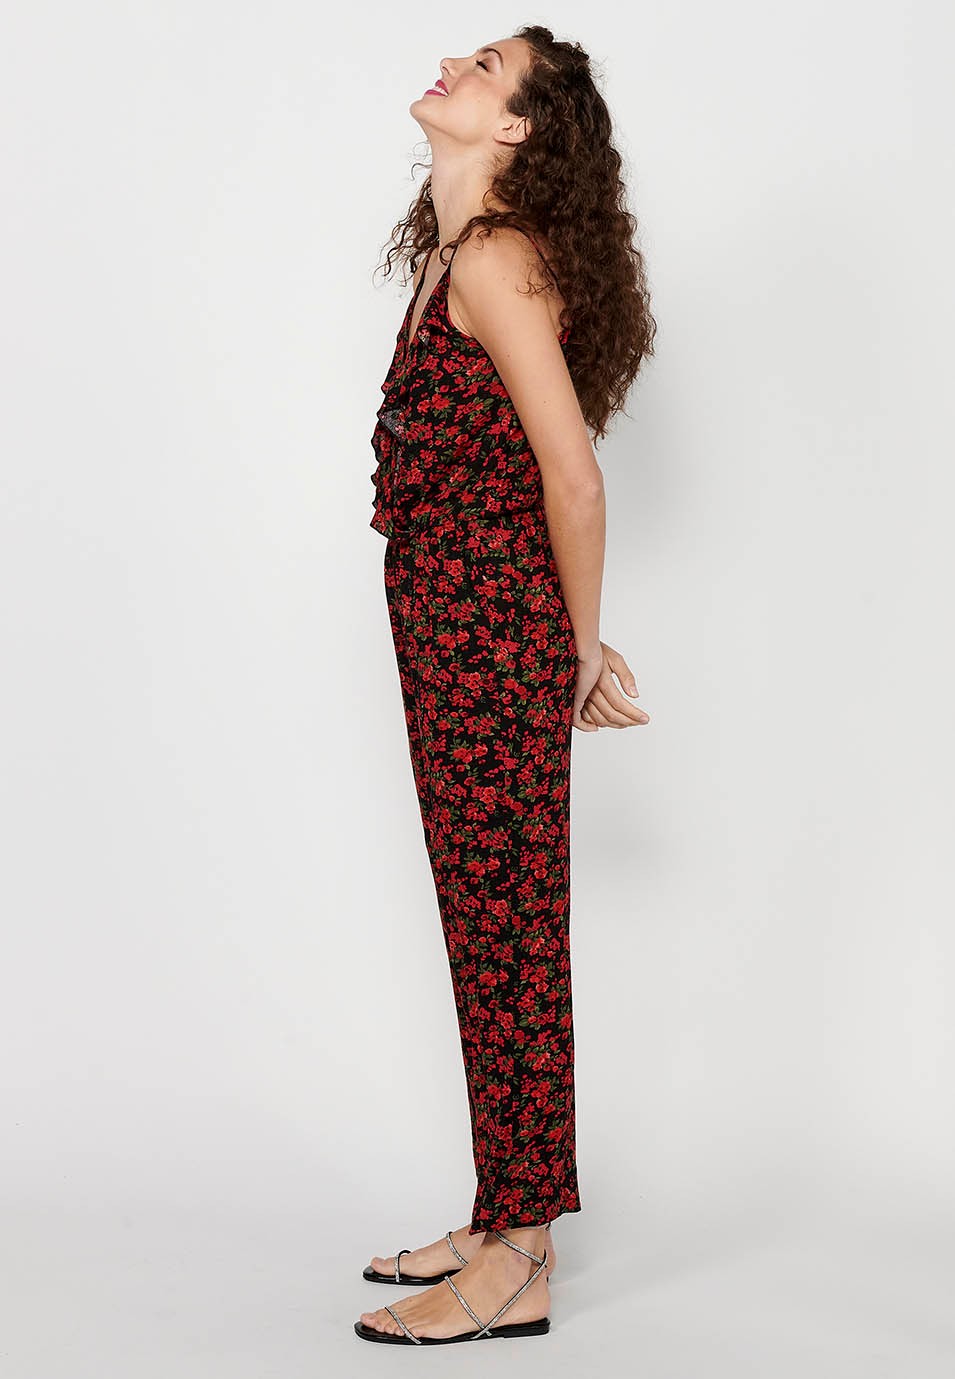 Long dress-trousers with adjustable straps with rubberized waist and red floral print for Women 6